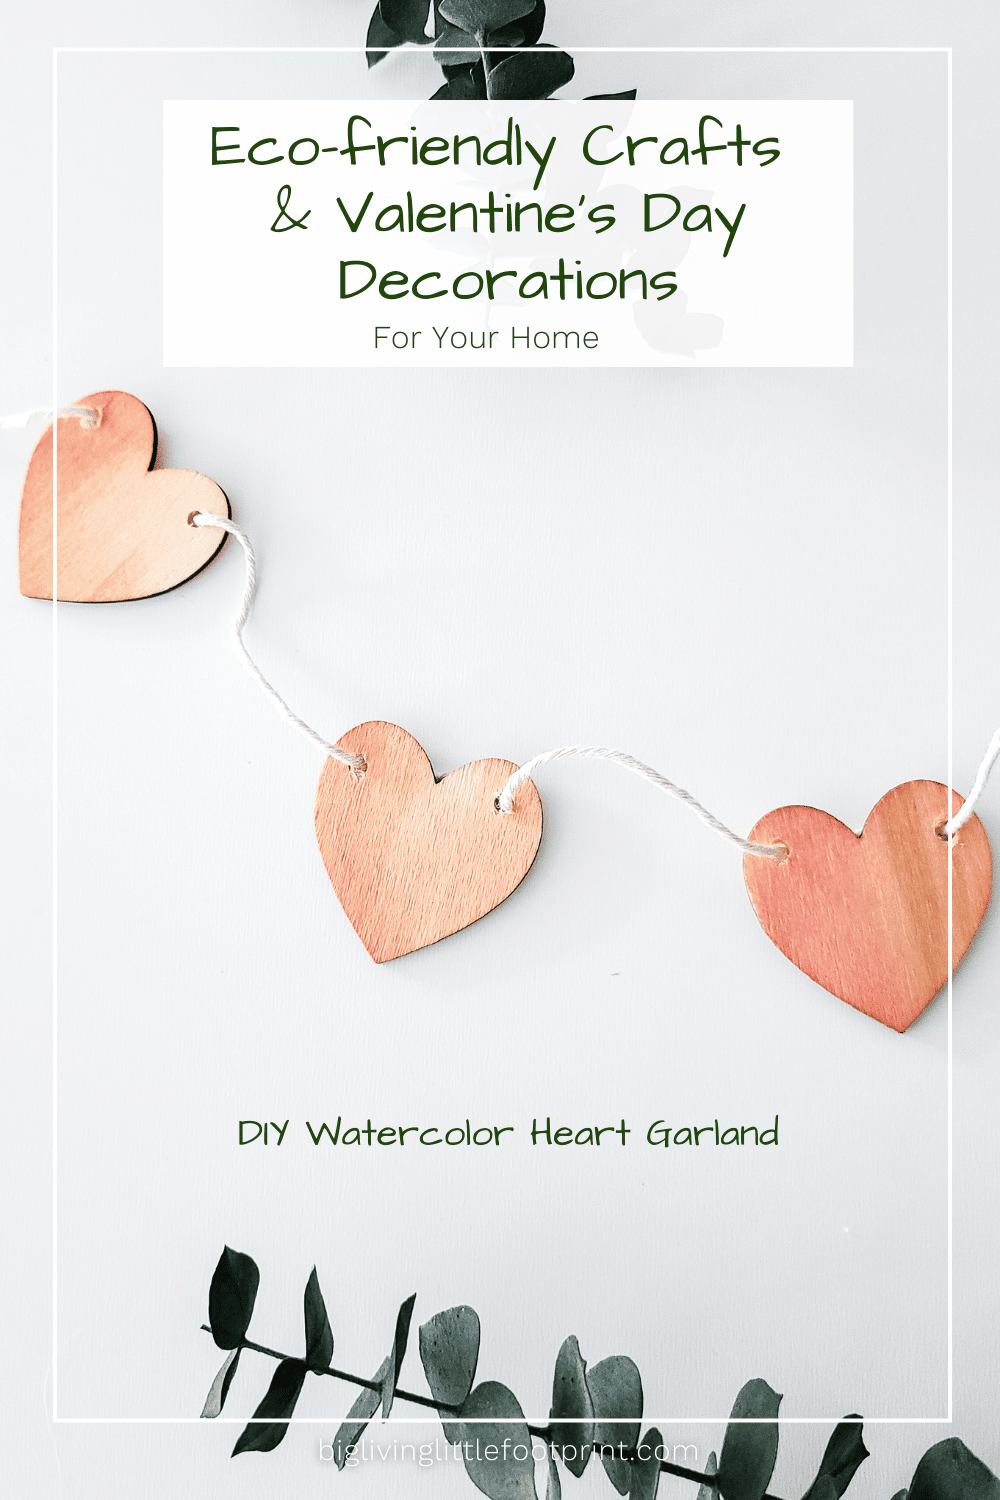 5 Eco-friendly Crafts & Valentine’s Day Decorations For Your Home